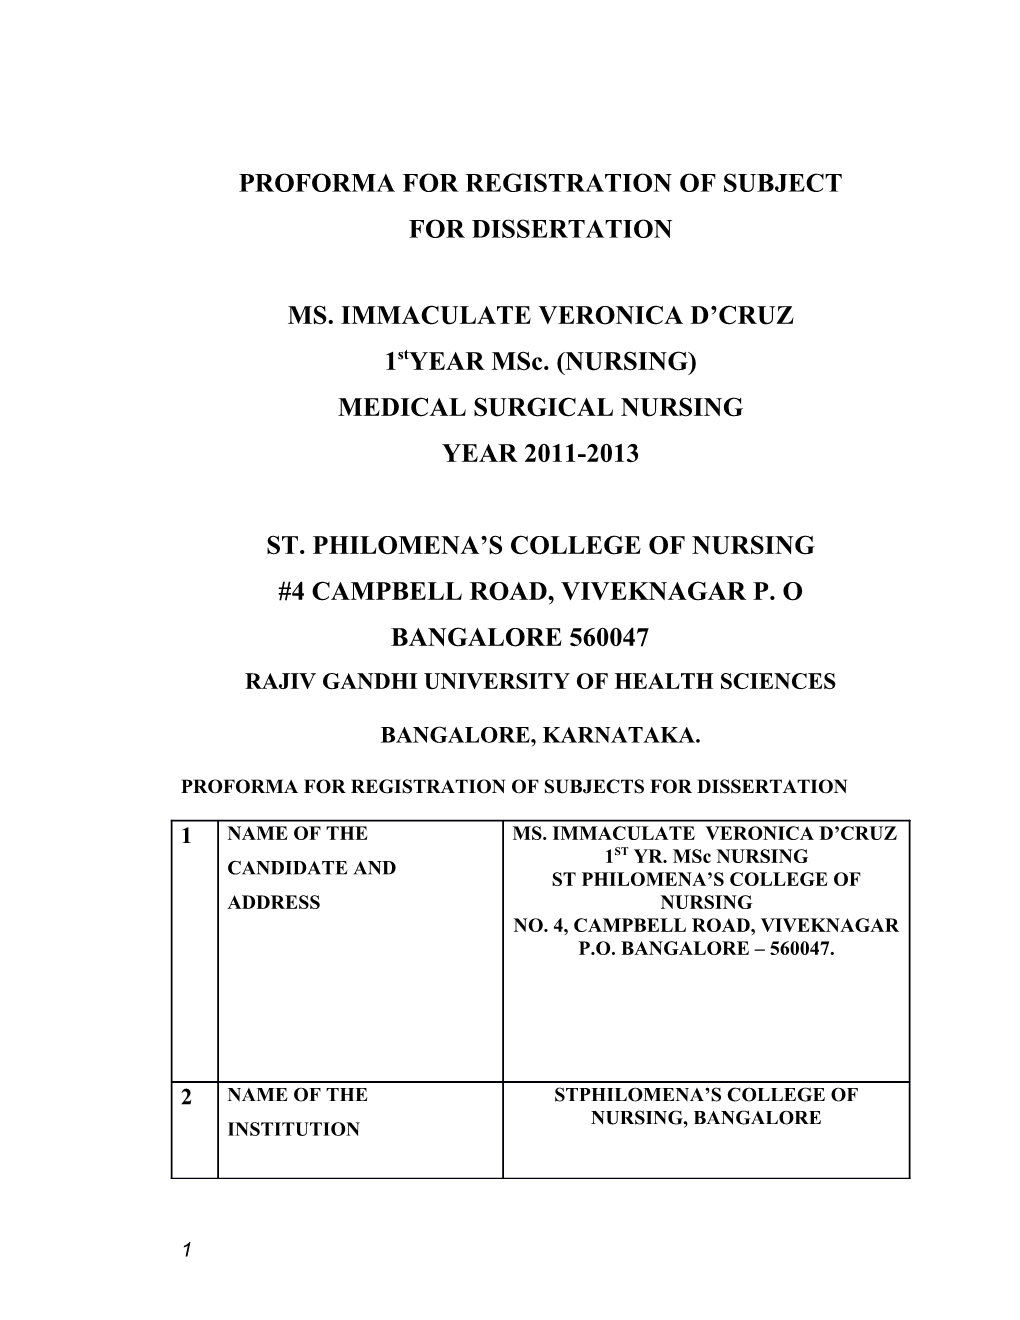 Proforma for Registration of Subject